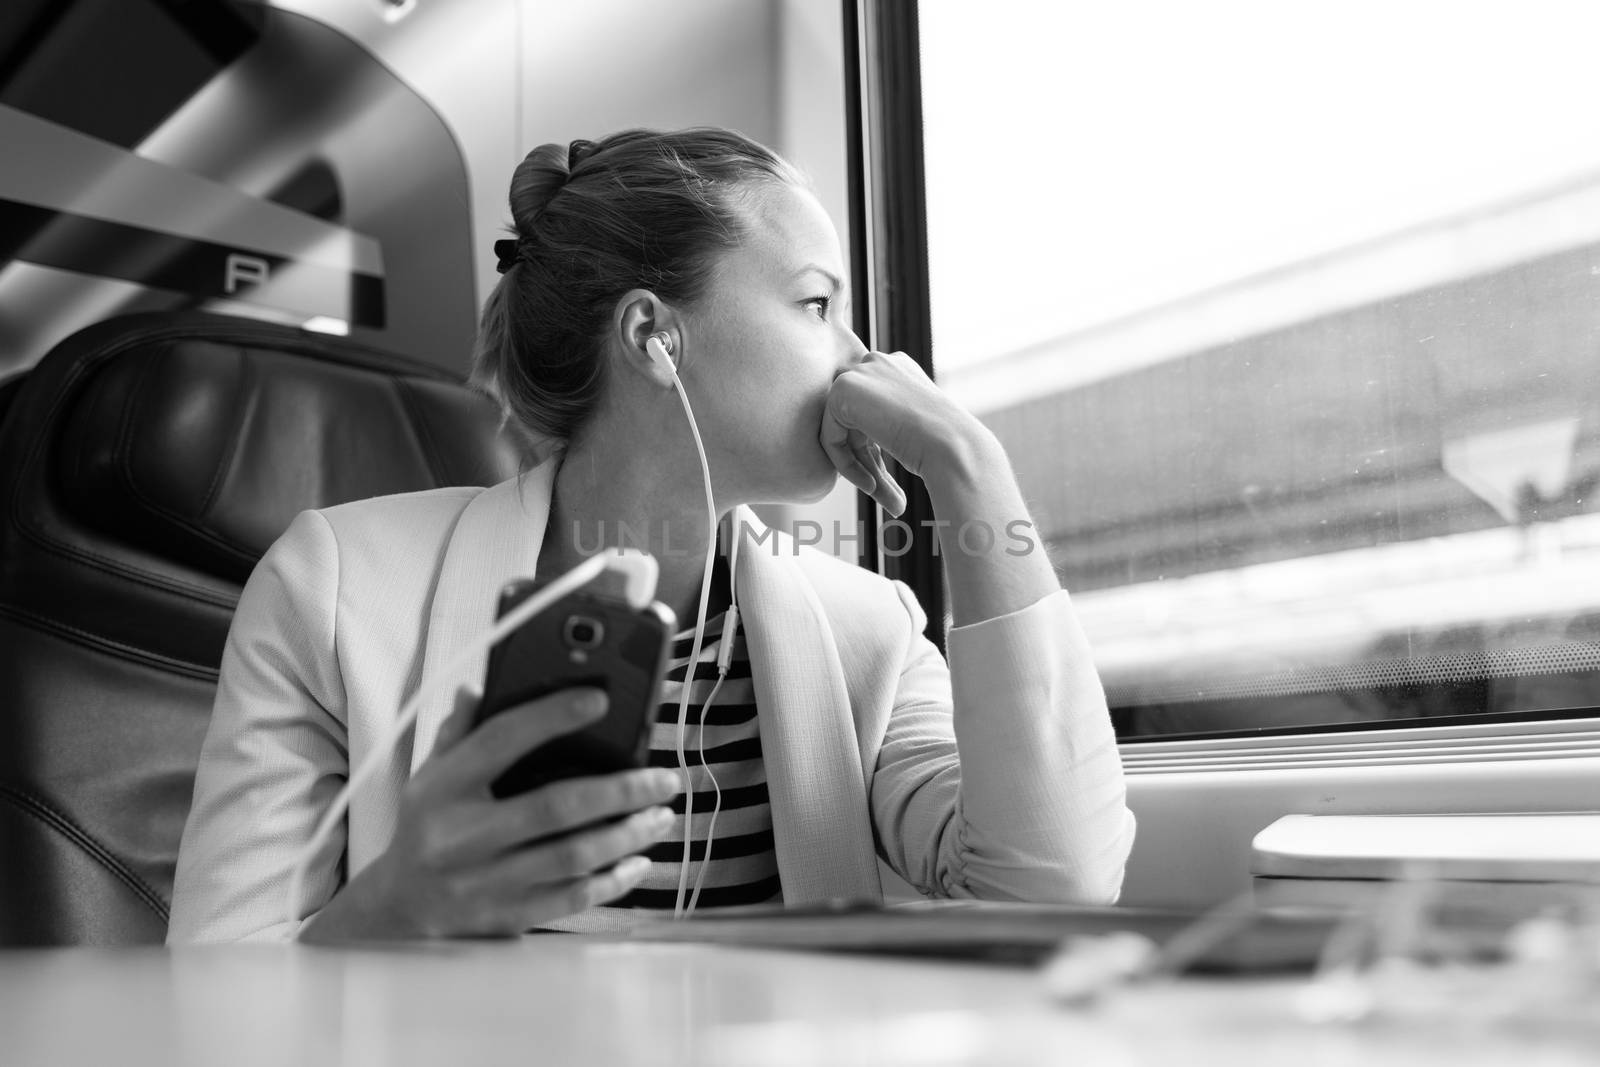 Thoughtful businesswoman looking trough the window, listening to podcast on cellphone using headphone set while traveling by train in business class seat. Black and white image.